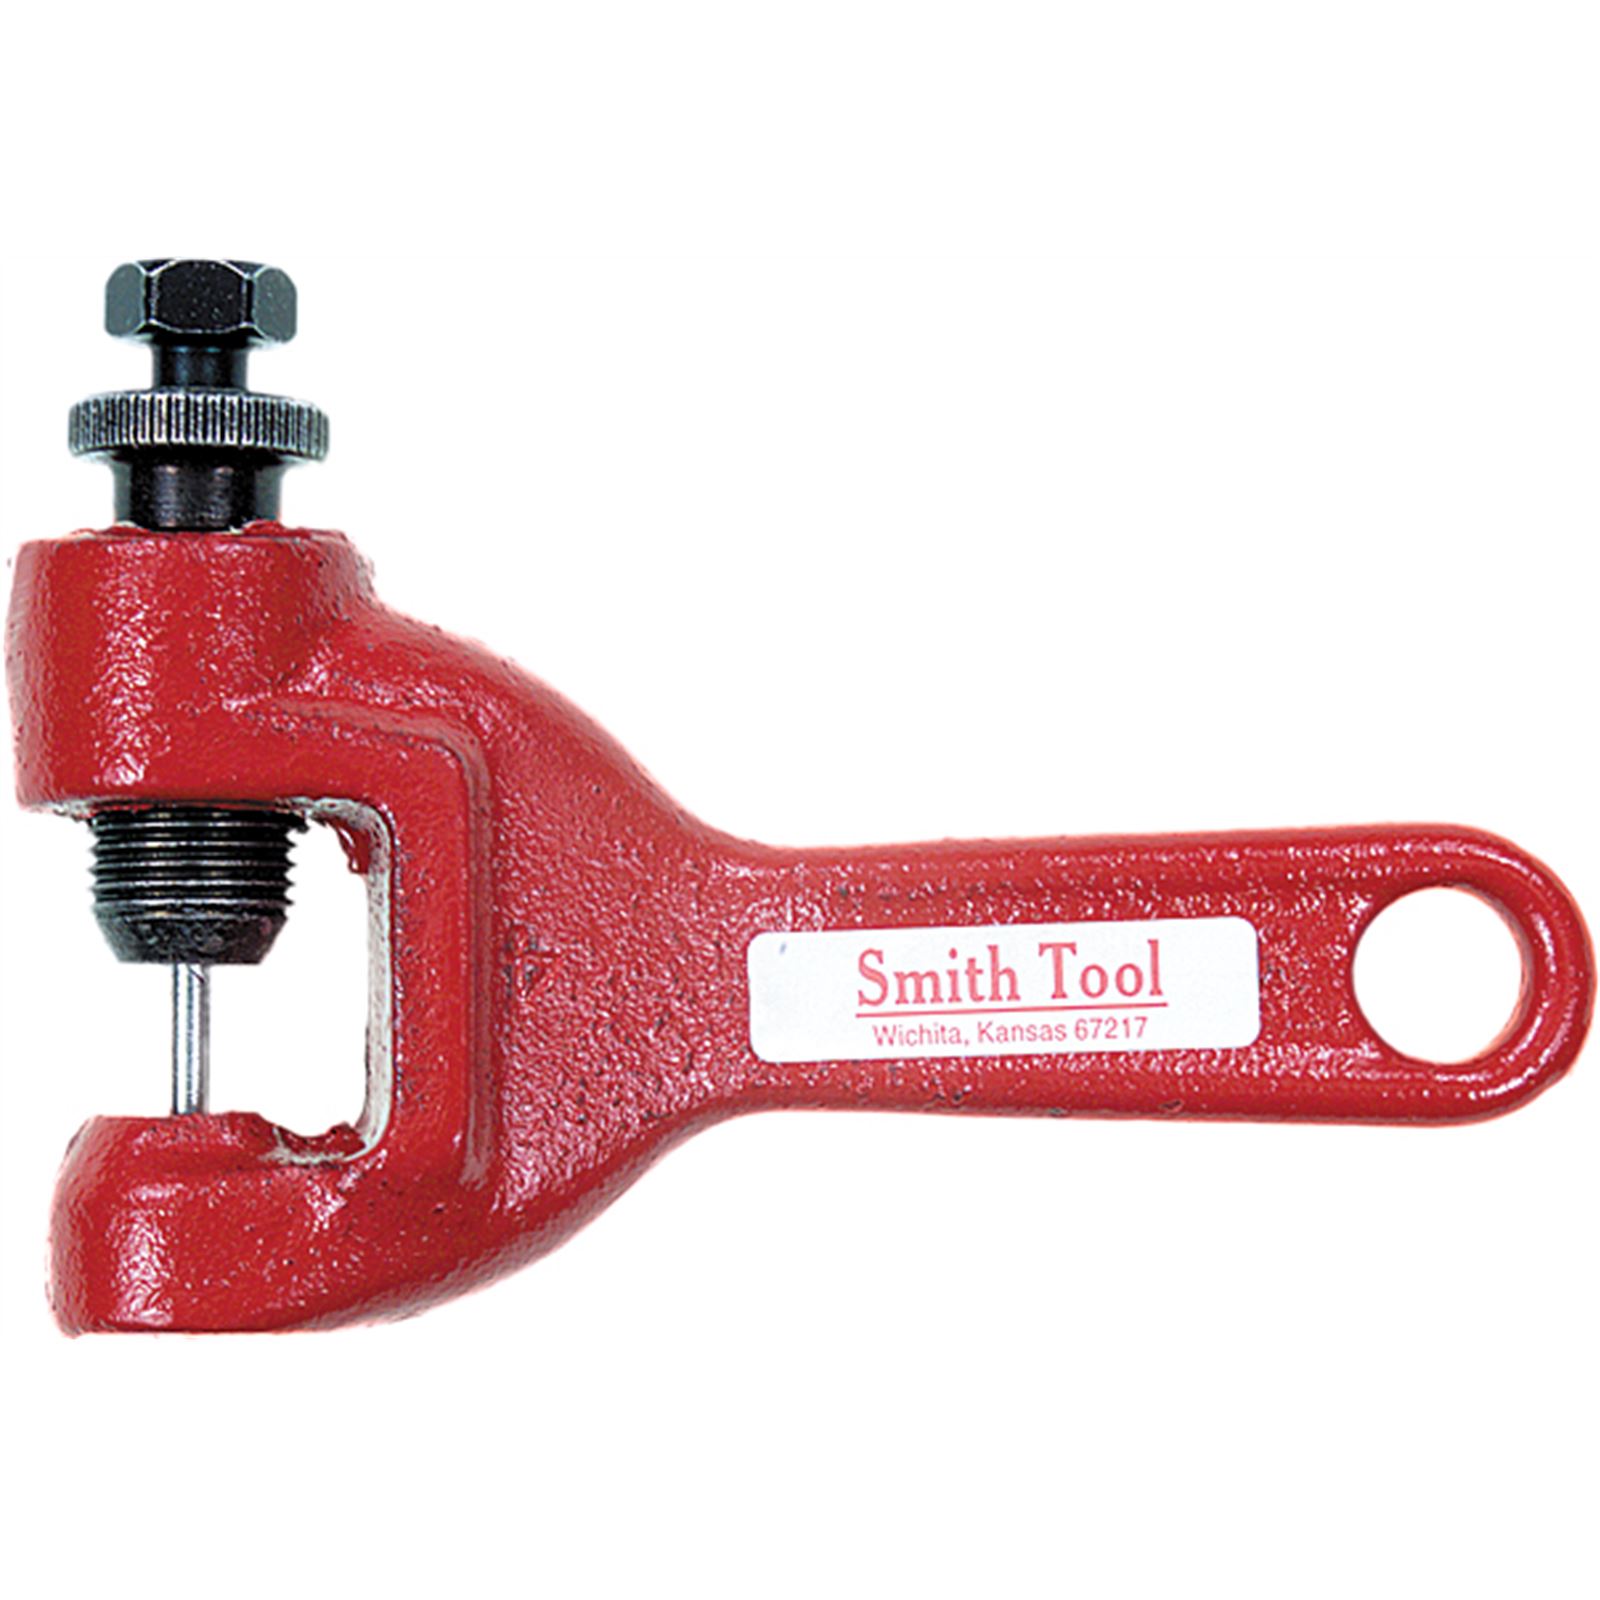 Smithtool Chain-A-Part Chain Breaker Punch